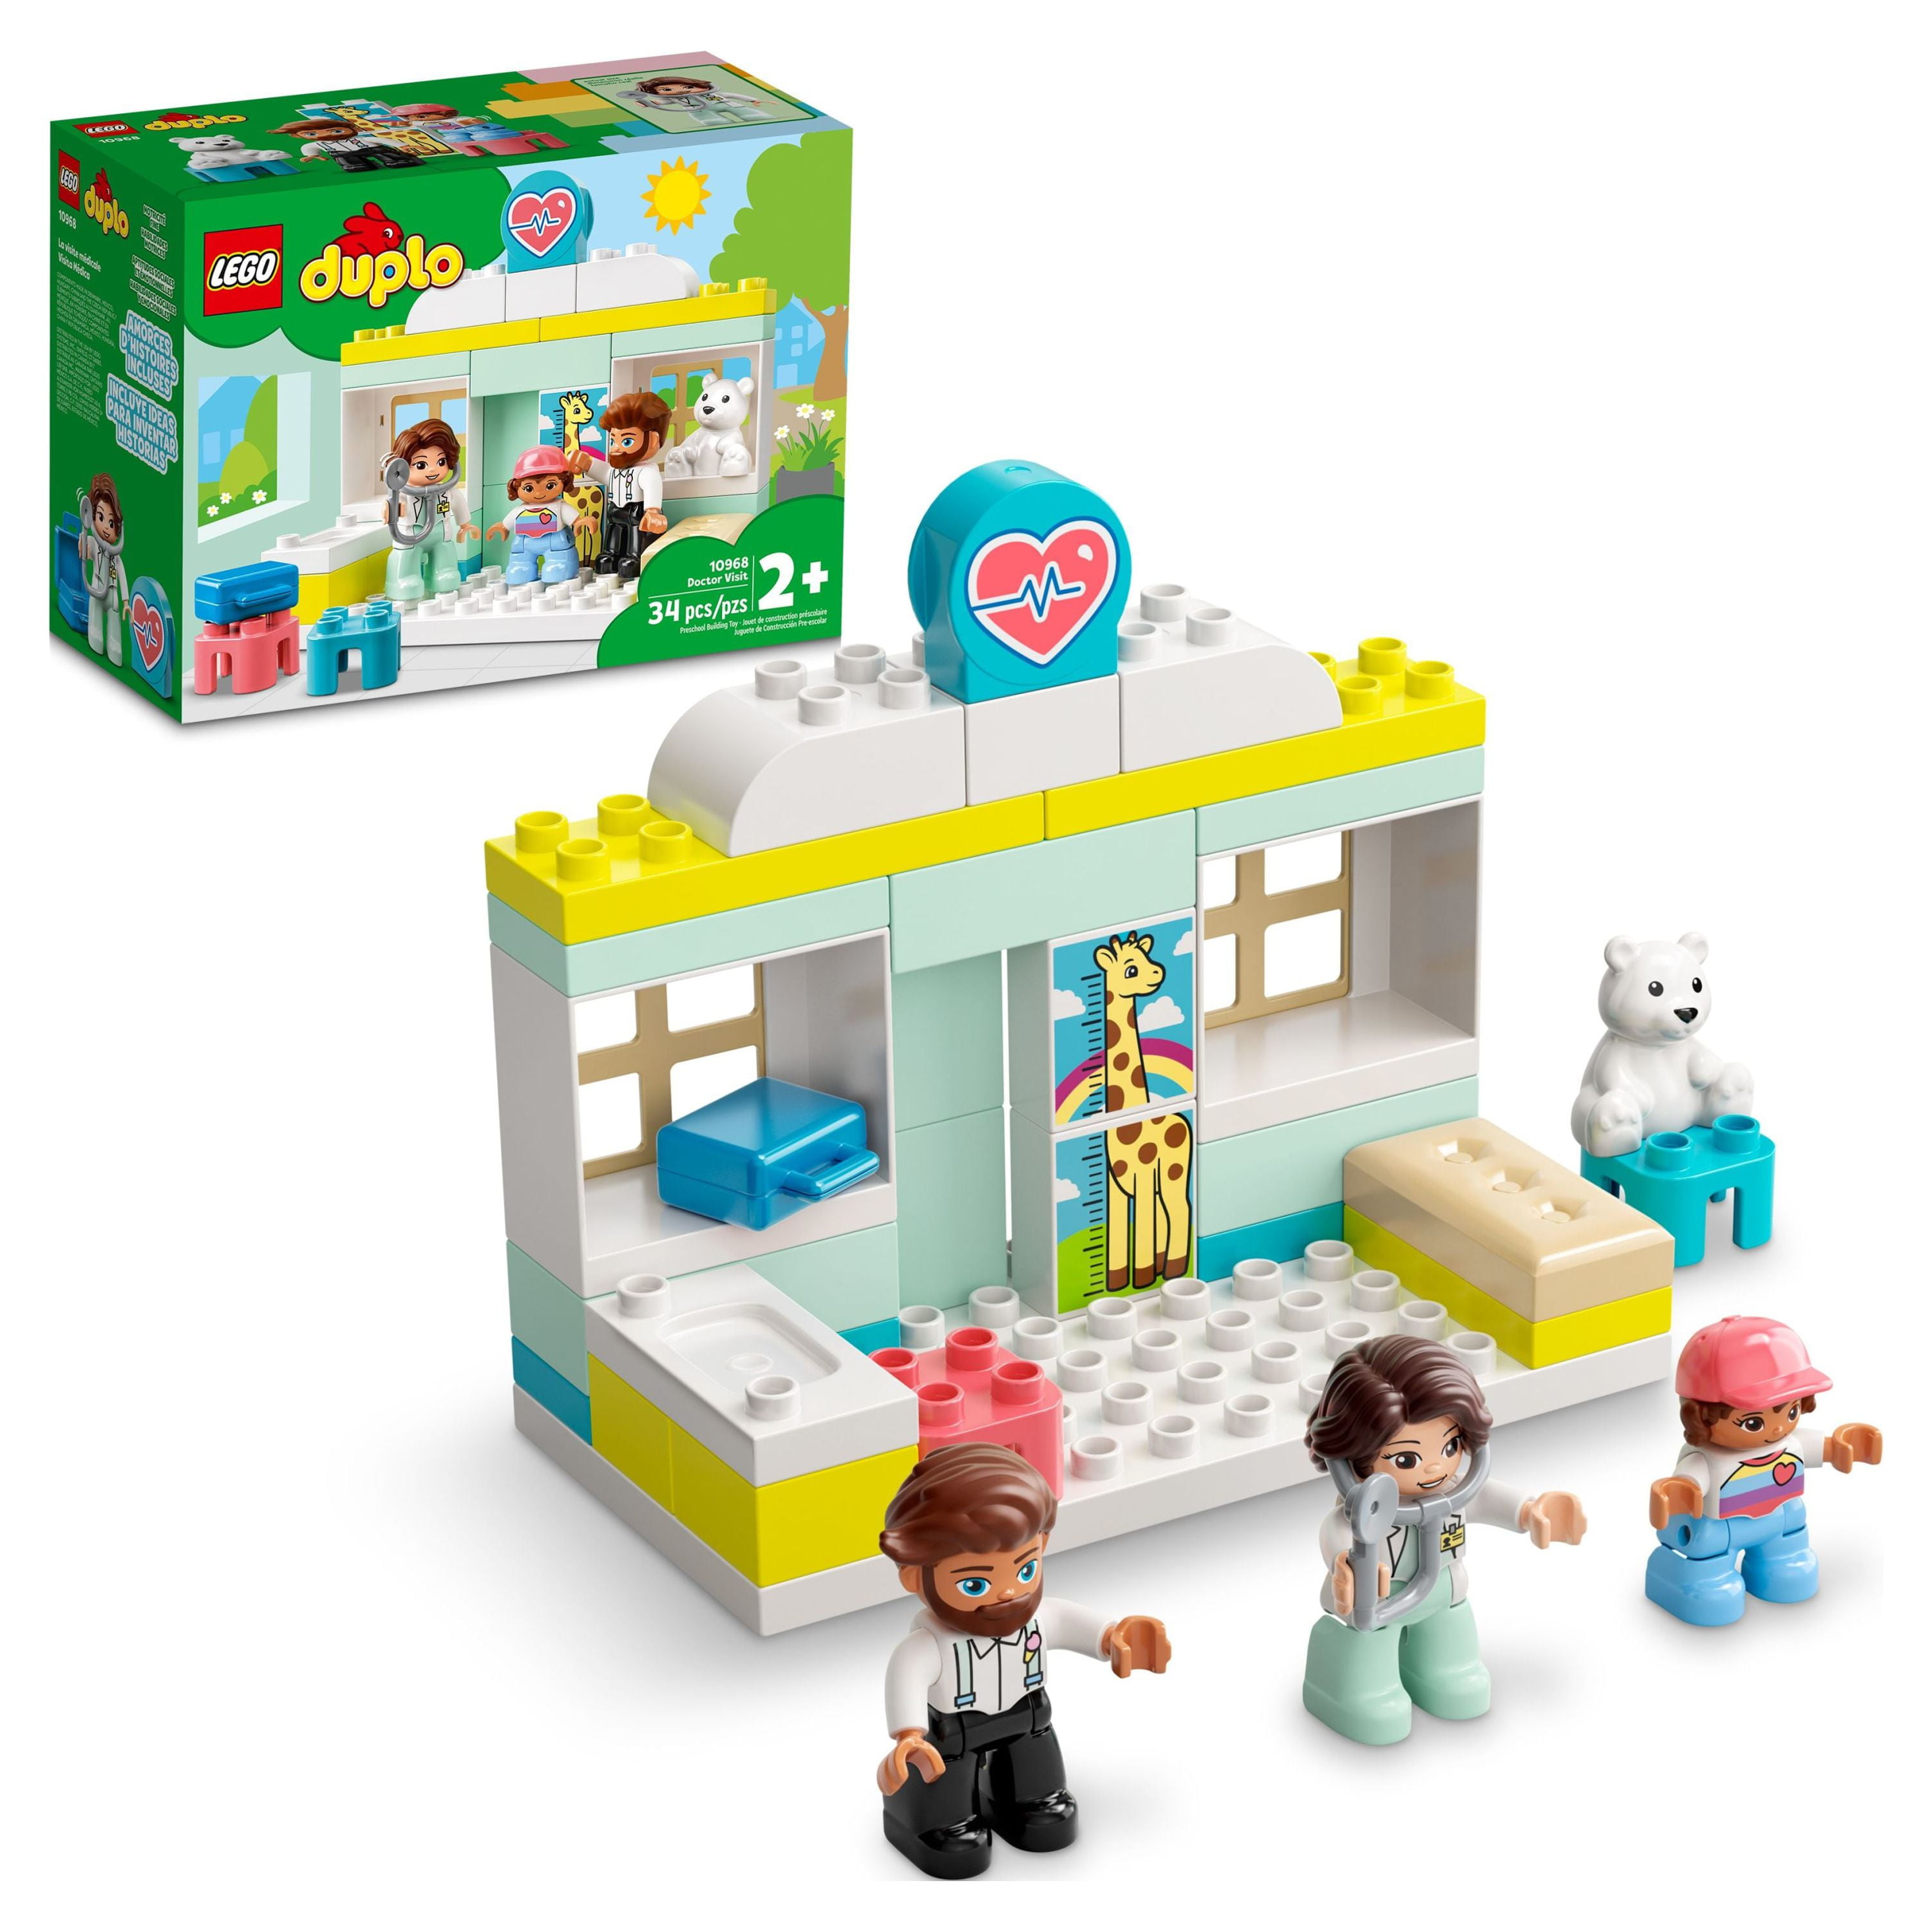 LEGO DUPLO Doctor Visit 10968 - Large Bricks Building Set, Educational  Early Learning Toy, Includes Doctor, Father, and Child Figures, Great  Development Gift for Toddlers, Girls, and Boys 2+ Years Old 